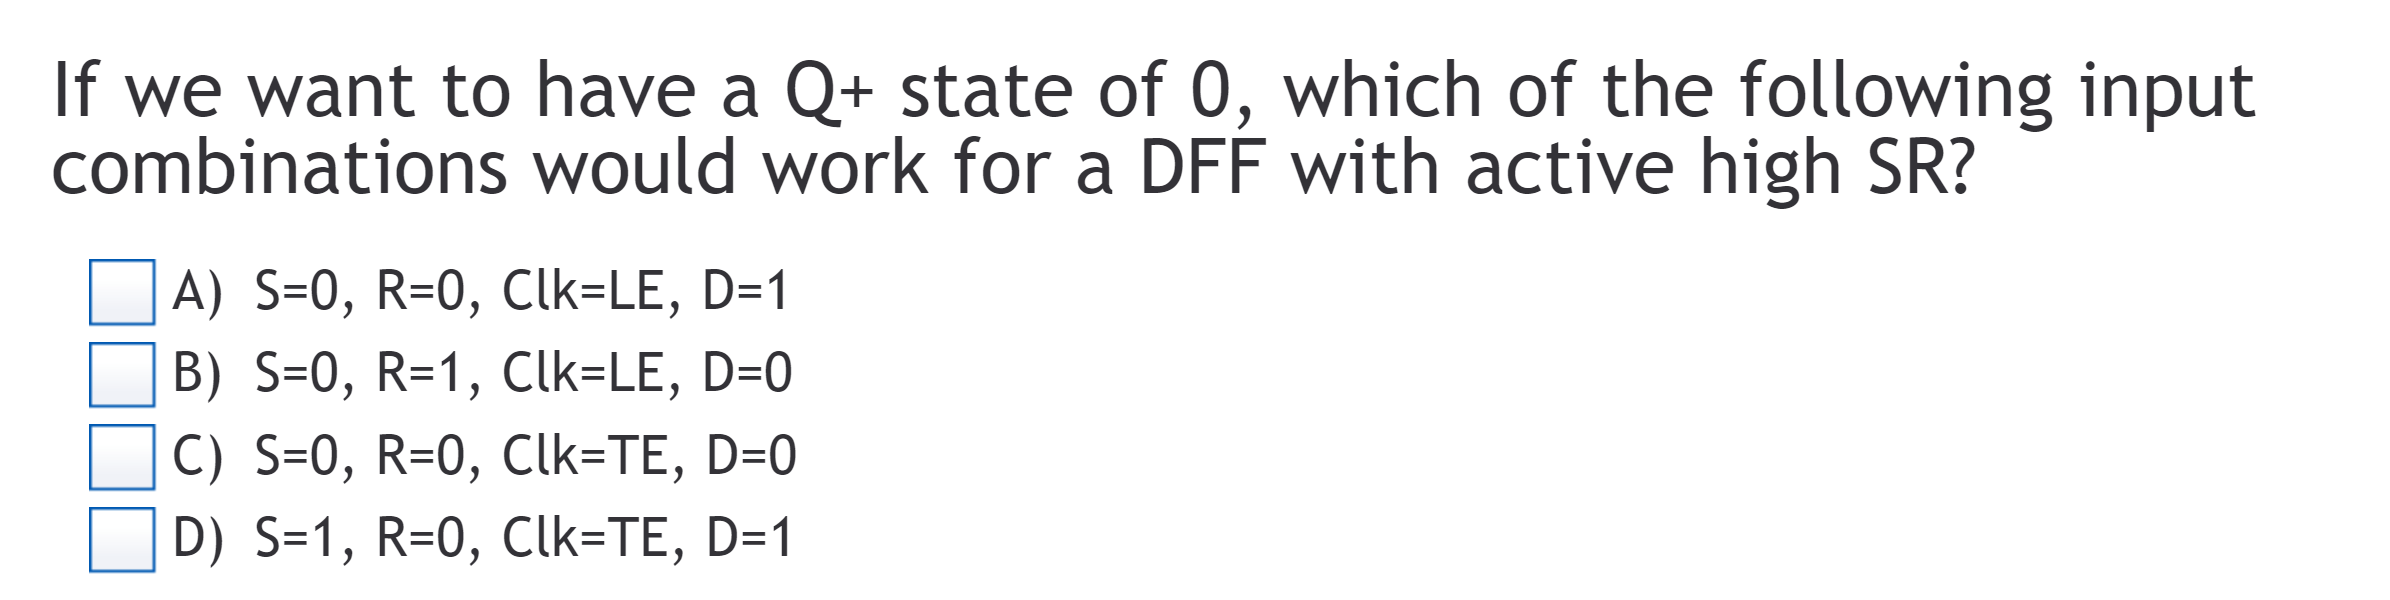 If we want to have a Q+ state of 0, which of the following input
combinations would work for a DFF with active high SR?
A) S-0, R-0, Clk LE, D-1
L. B) S=0, R=1, Clk-LE, D-O
C) S-0, R-0, Clk TE, D-0
D) S-1, R-0, Clk-TE, D-1
